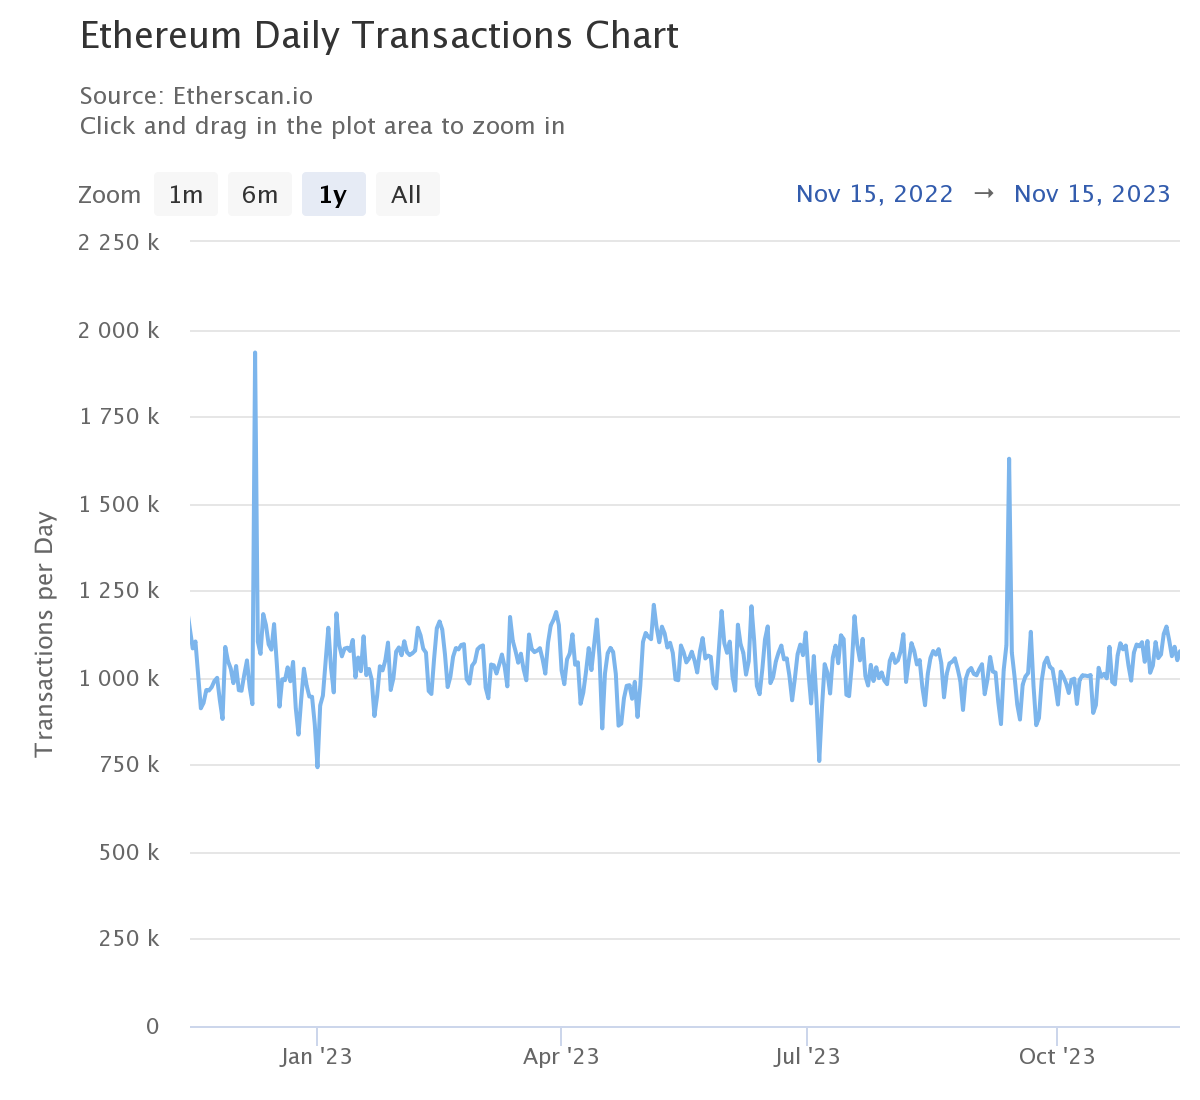 Ethereum Daily Transaction Volumes. Source: Etherscan.io